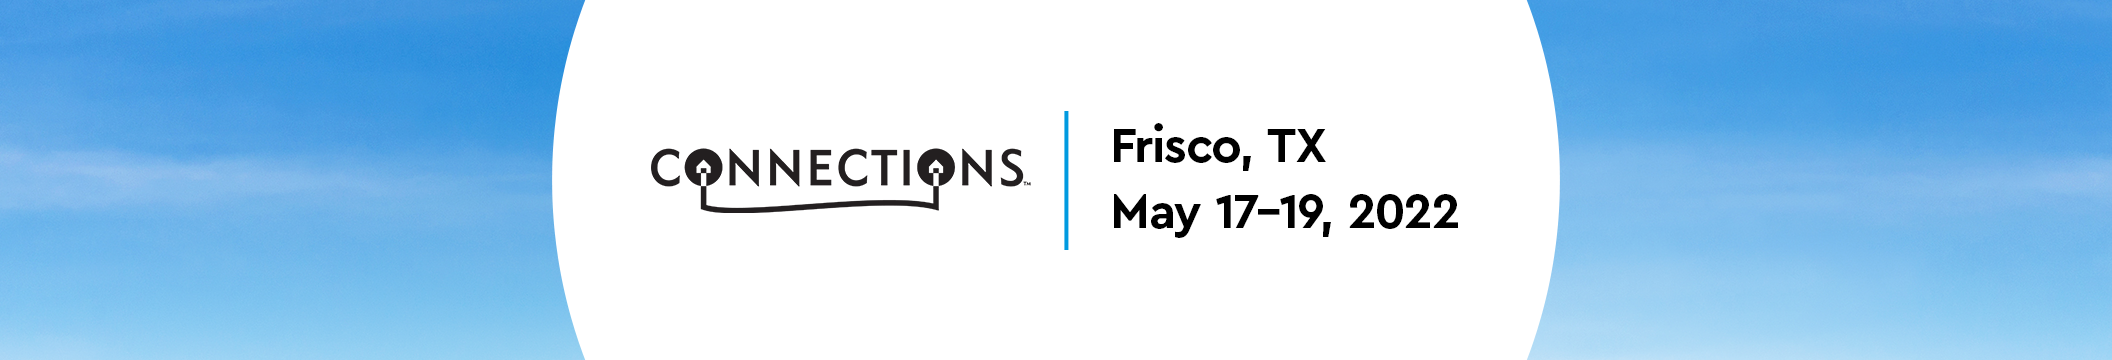 Connections | Frisco, TX | May 17-19, 2022